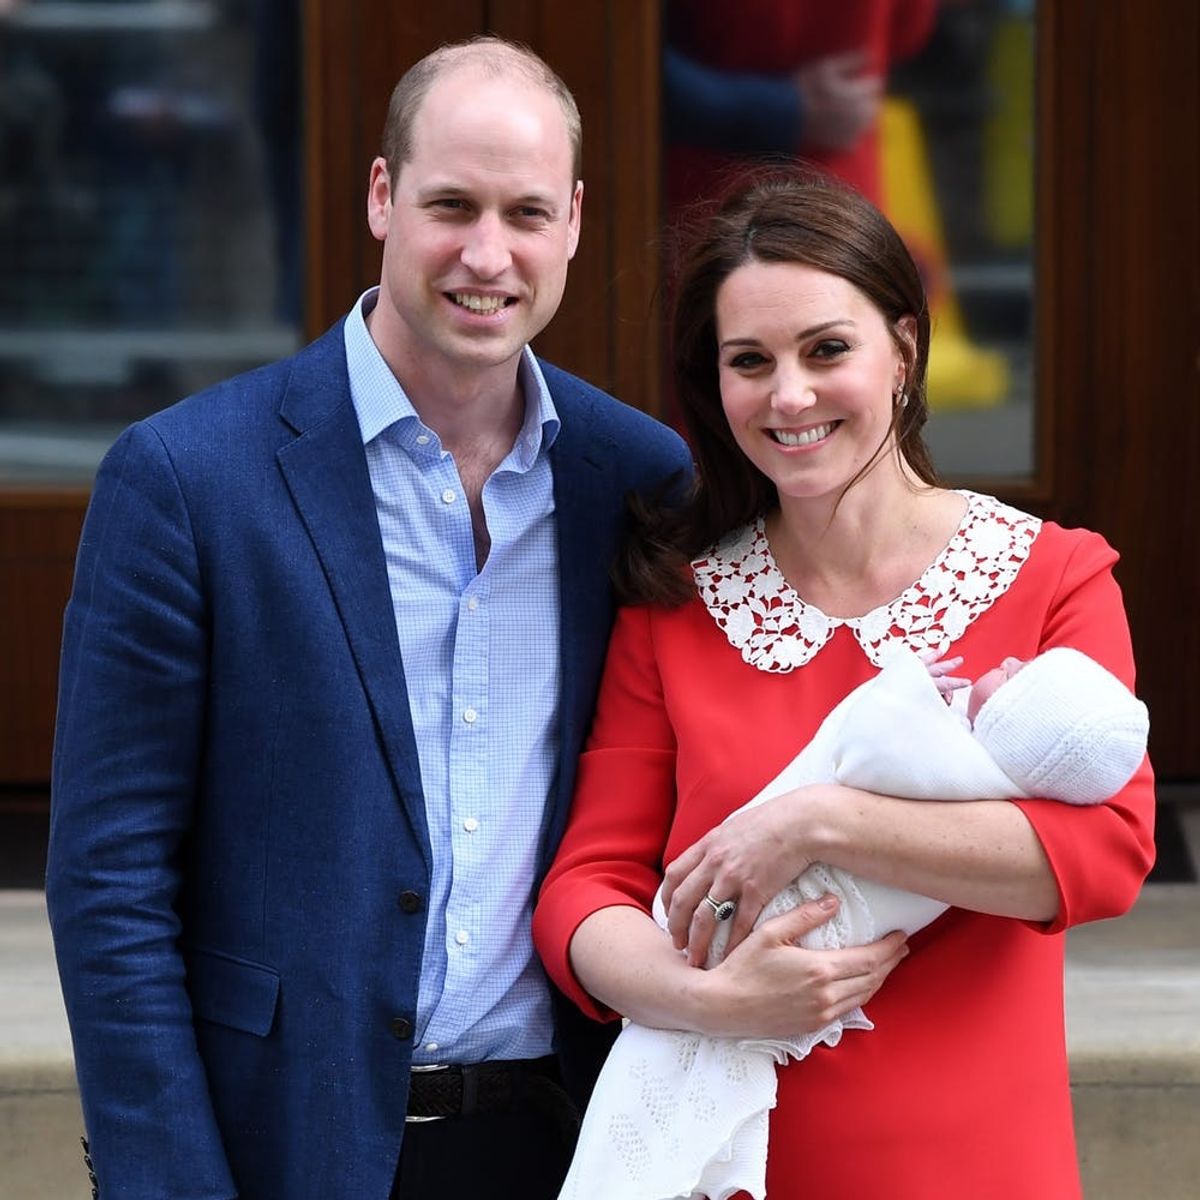 See How the New Royal Baby’s Debut Compares to Prince George and Princess Charlotte’s Debuts